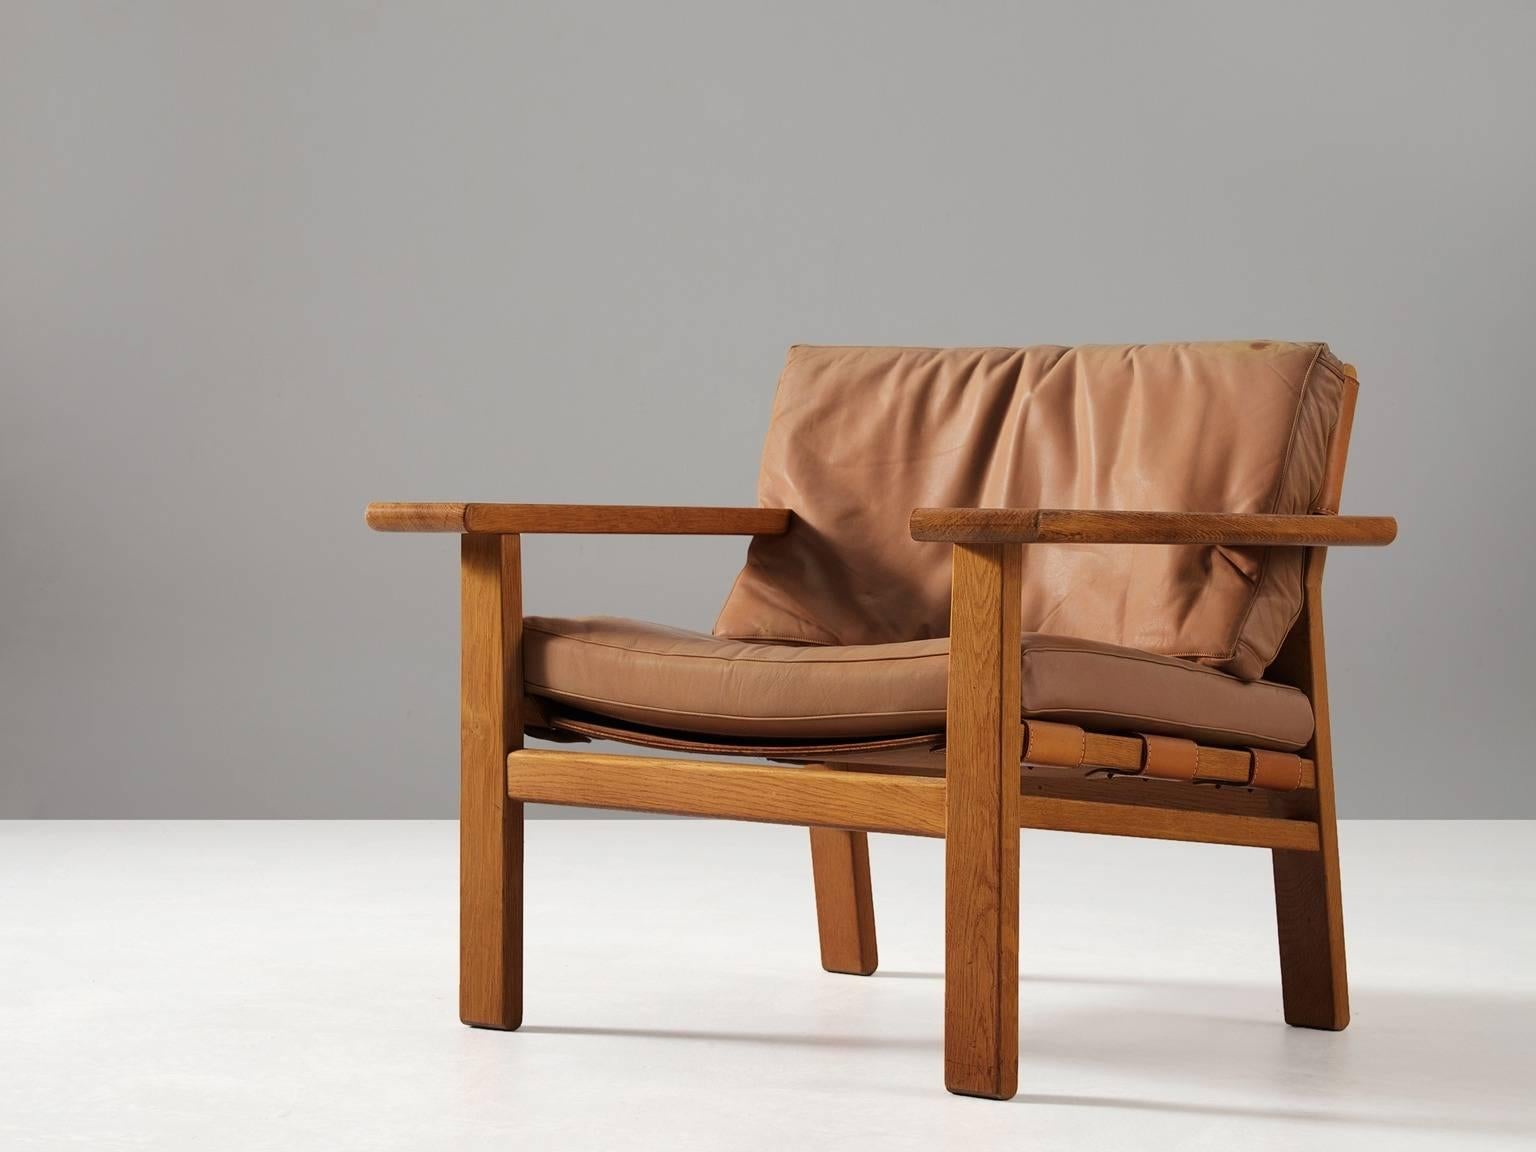 Armchair, in oak and leather, by Kurt Østervig for K.P. Møbler, Denmark, 1950s. 

Sturdy armchair in solid oak and saddle leather. This design of Ostervig has a strong resemblance to the Spanish Chair of Børge Mogensen. Yet the design of this